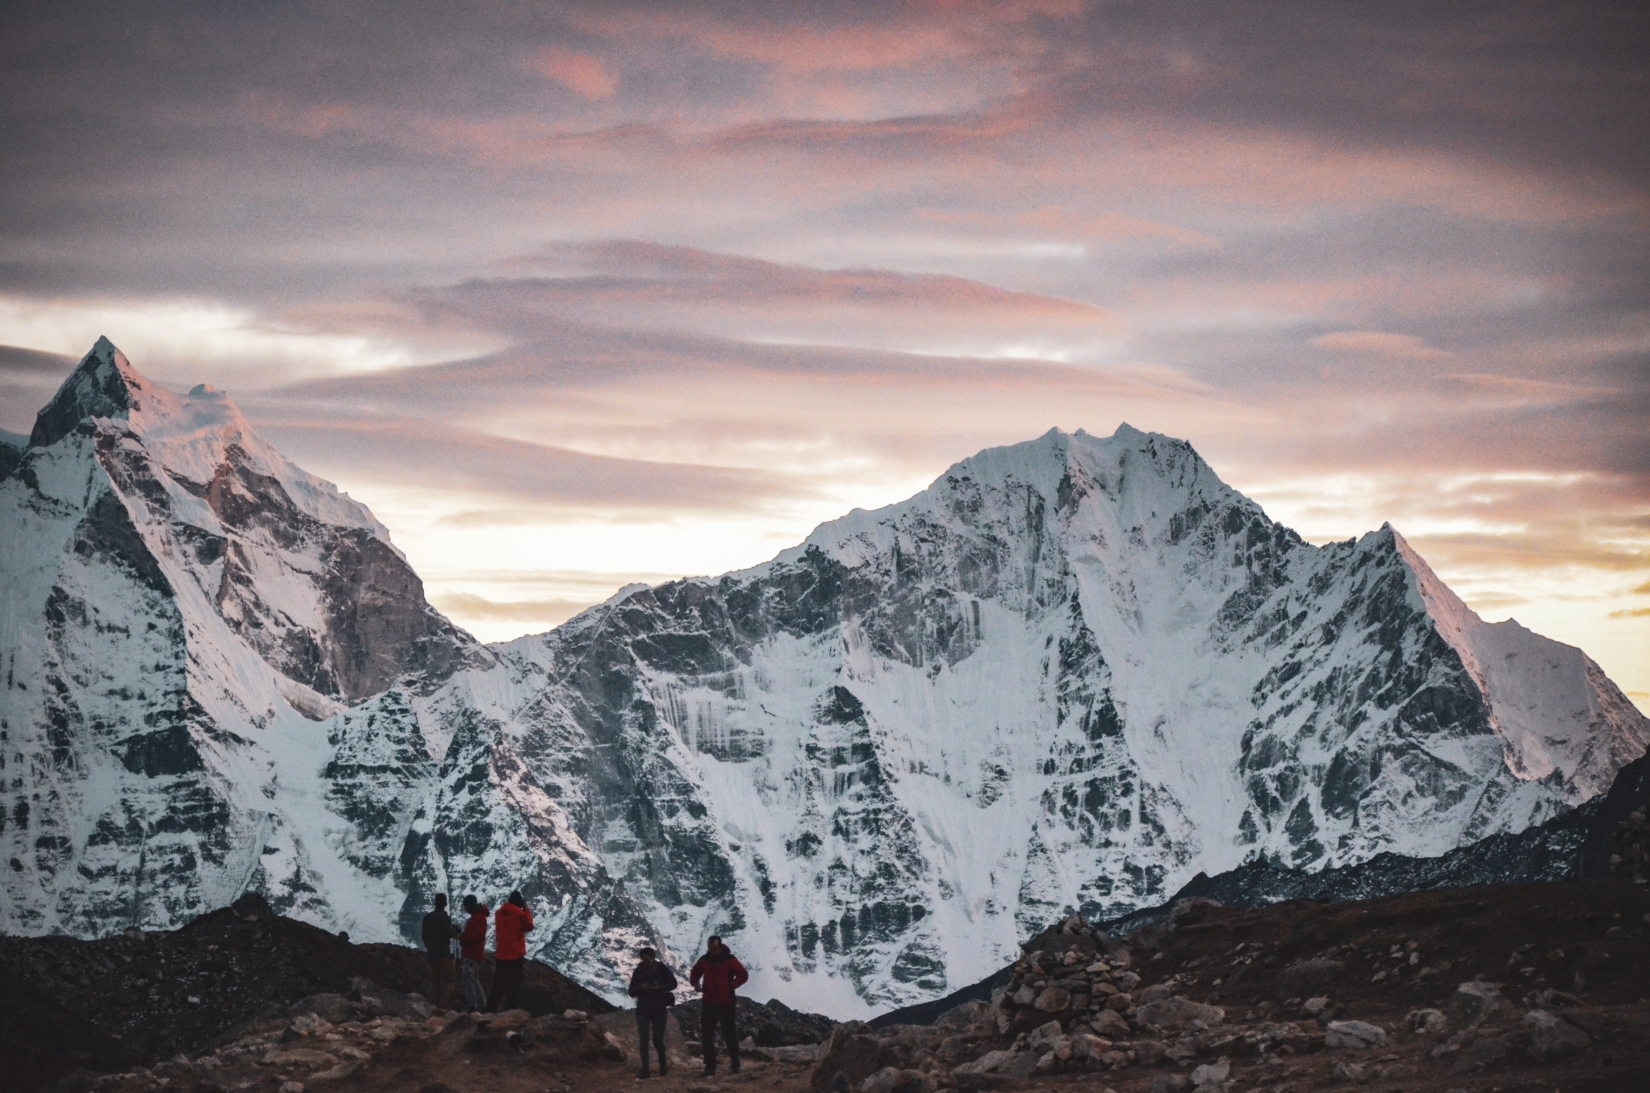 A photograph of Himalayan mountains near Everest Base Camp during sunrise